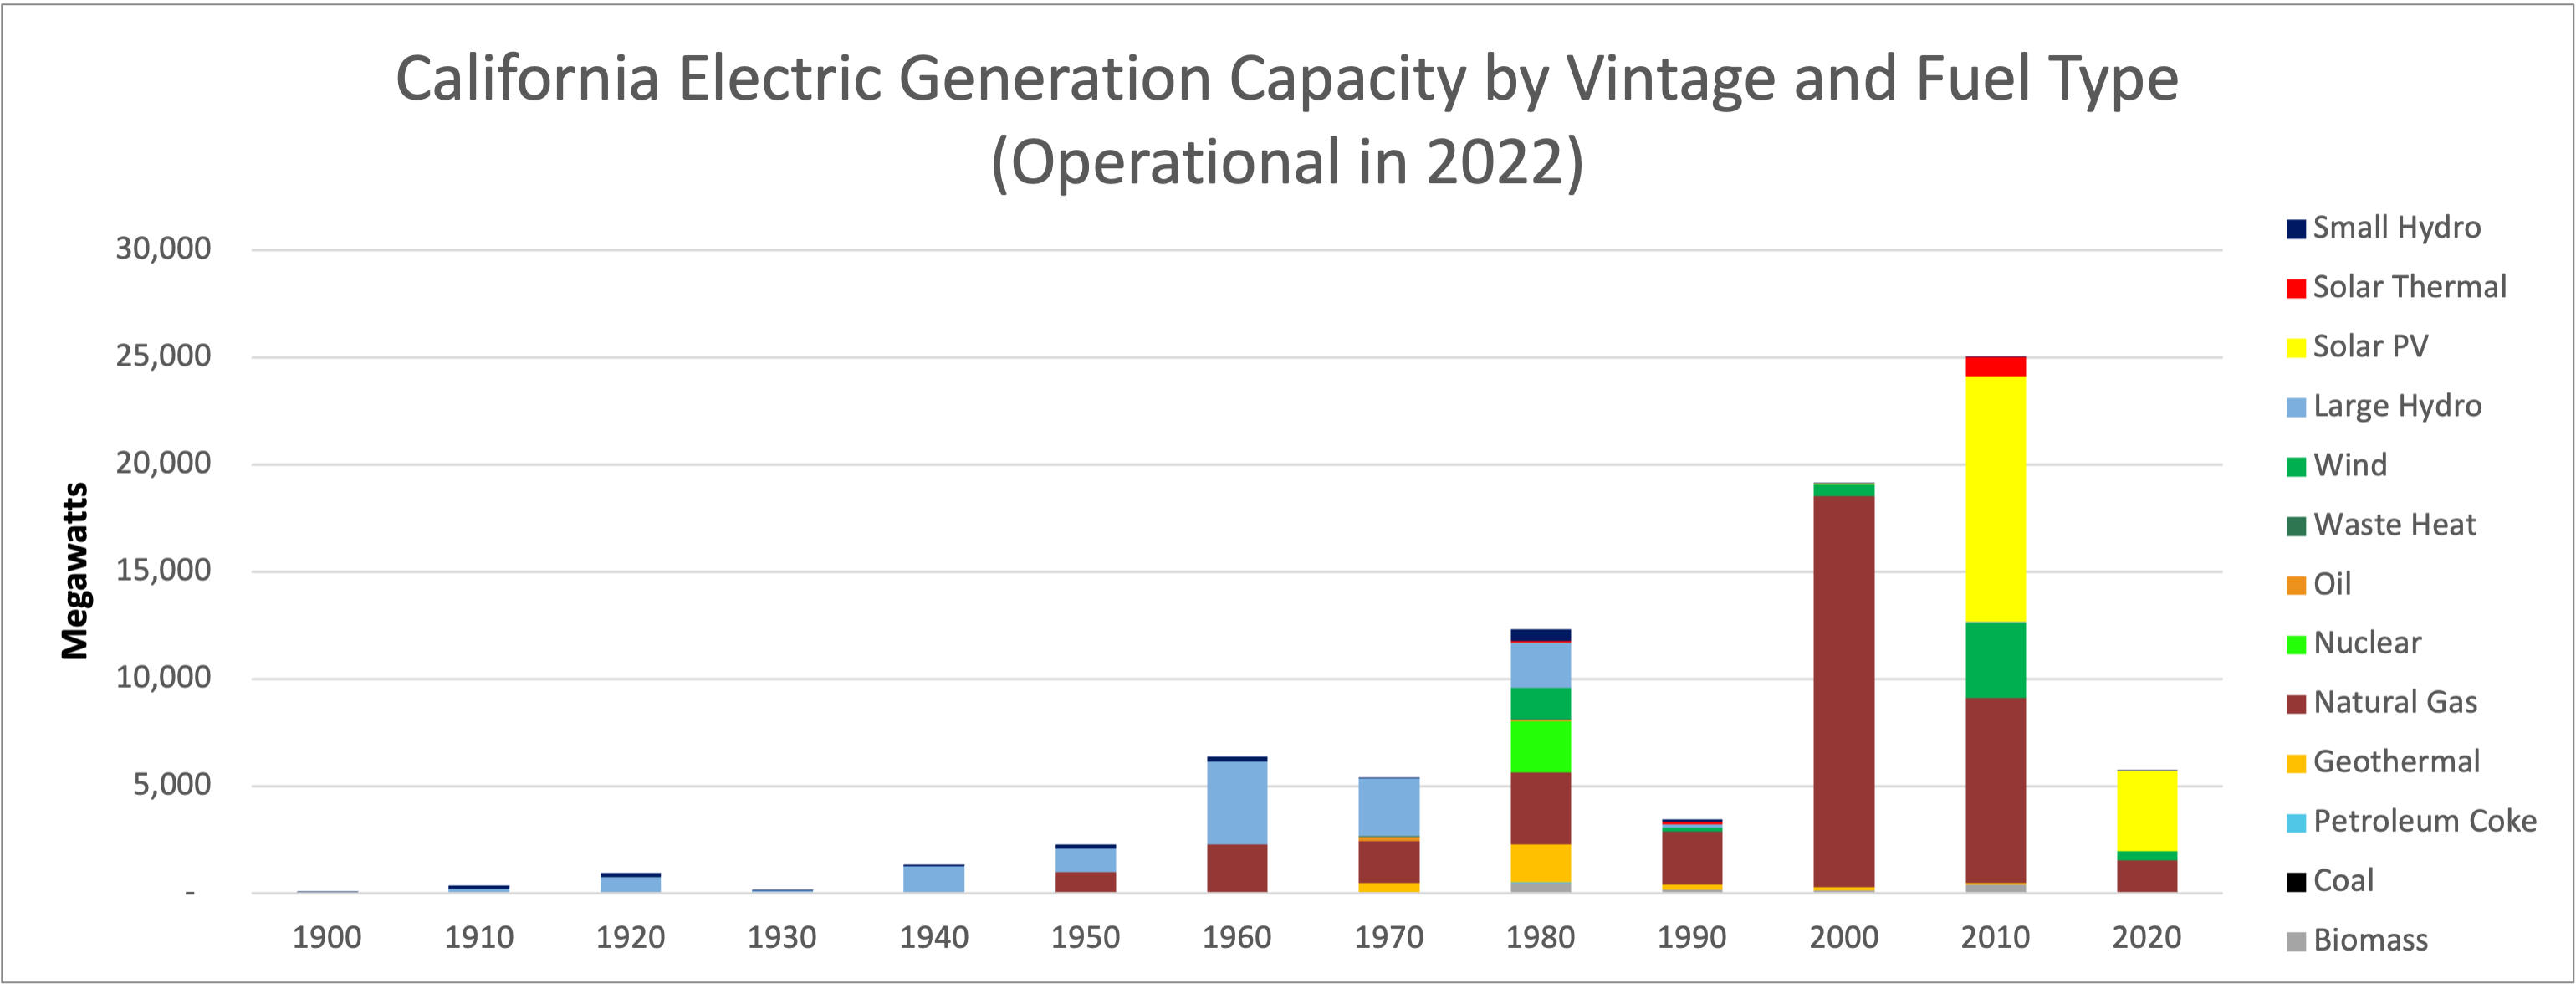 California  Electric Generation Capacity by Vintage and Fuel Type (Operational in 2020)